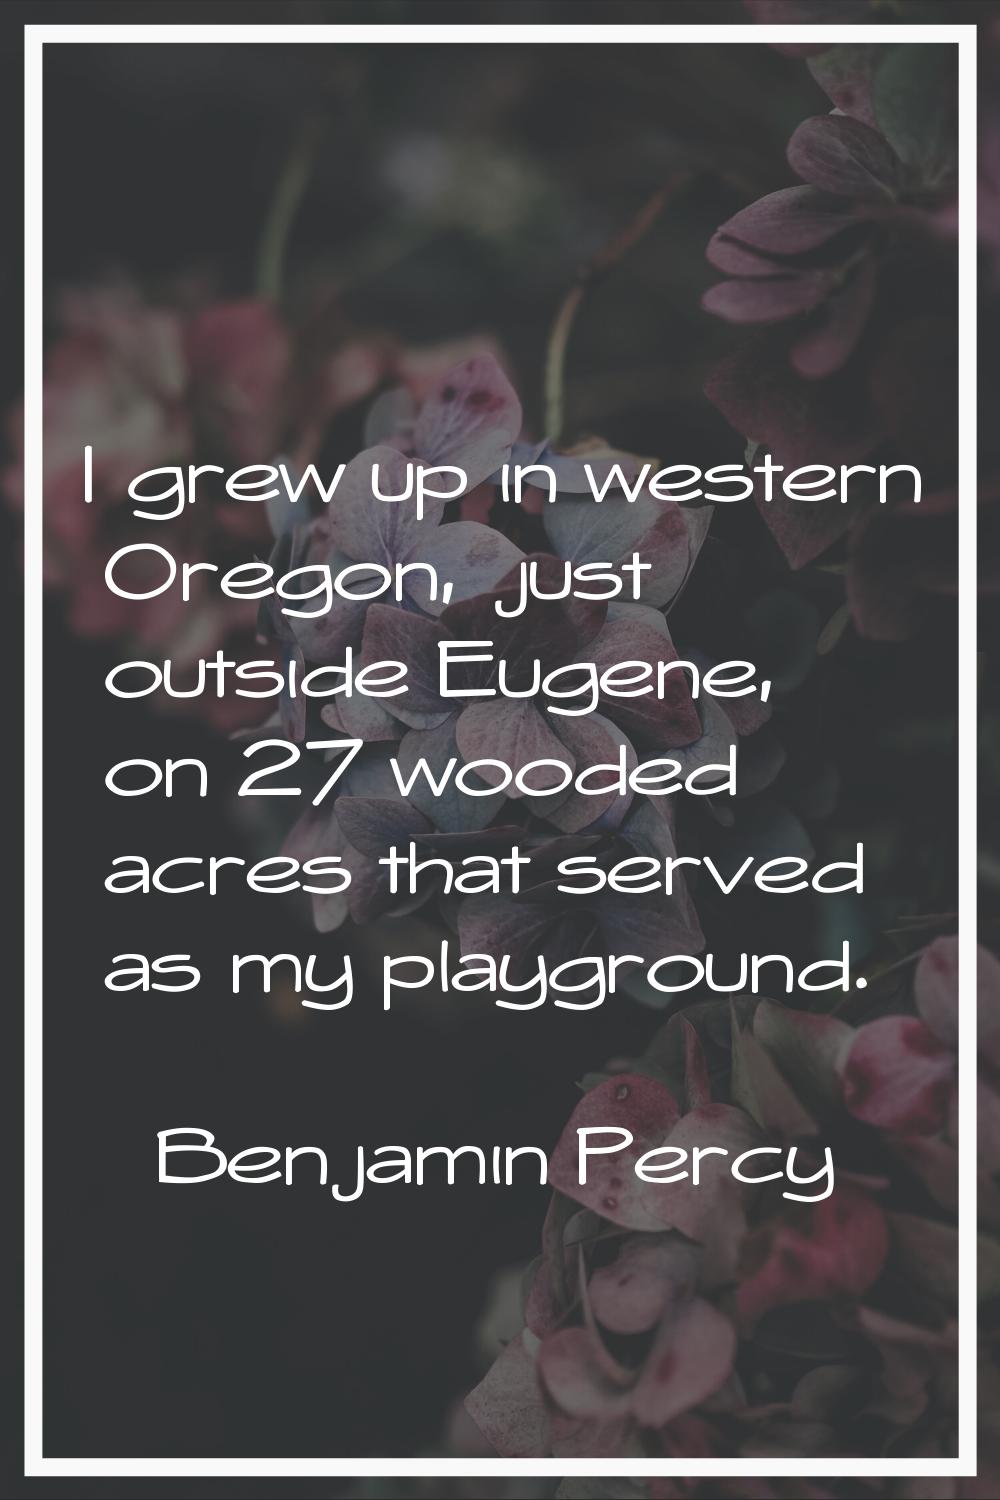 I grew up in western Oregon, just outside Eugene, on 27 wooded acres that served as my playground.